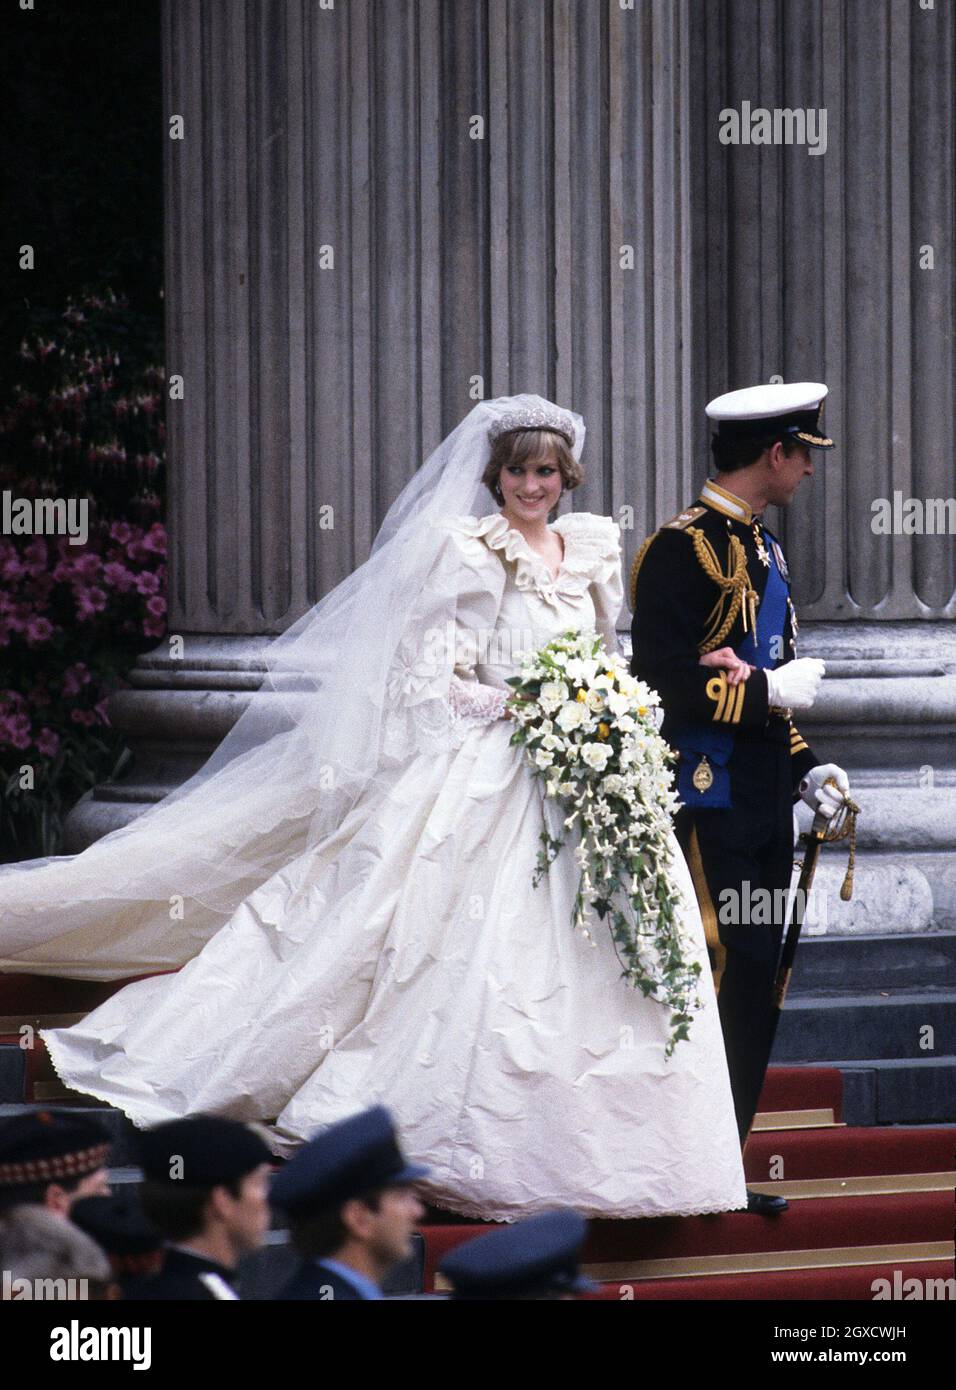 Diana, Princess of Wales, wearing an Emanuel wedding dress, and Prince Charles, Prince of Wales leave St. Paul's Cathedral following their wedding on 29 July 1981.  Designers Elizabeth and David Emanuel are holding an auction of dresses worn by the late Princess Diana. The dresses are to go up for auction on June 8, 2010 in London, at specialist vintage fashion auctioneers Kerry Taylor Auctions. Stock Photo